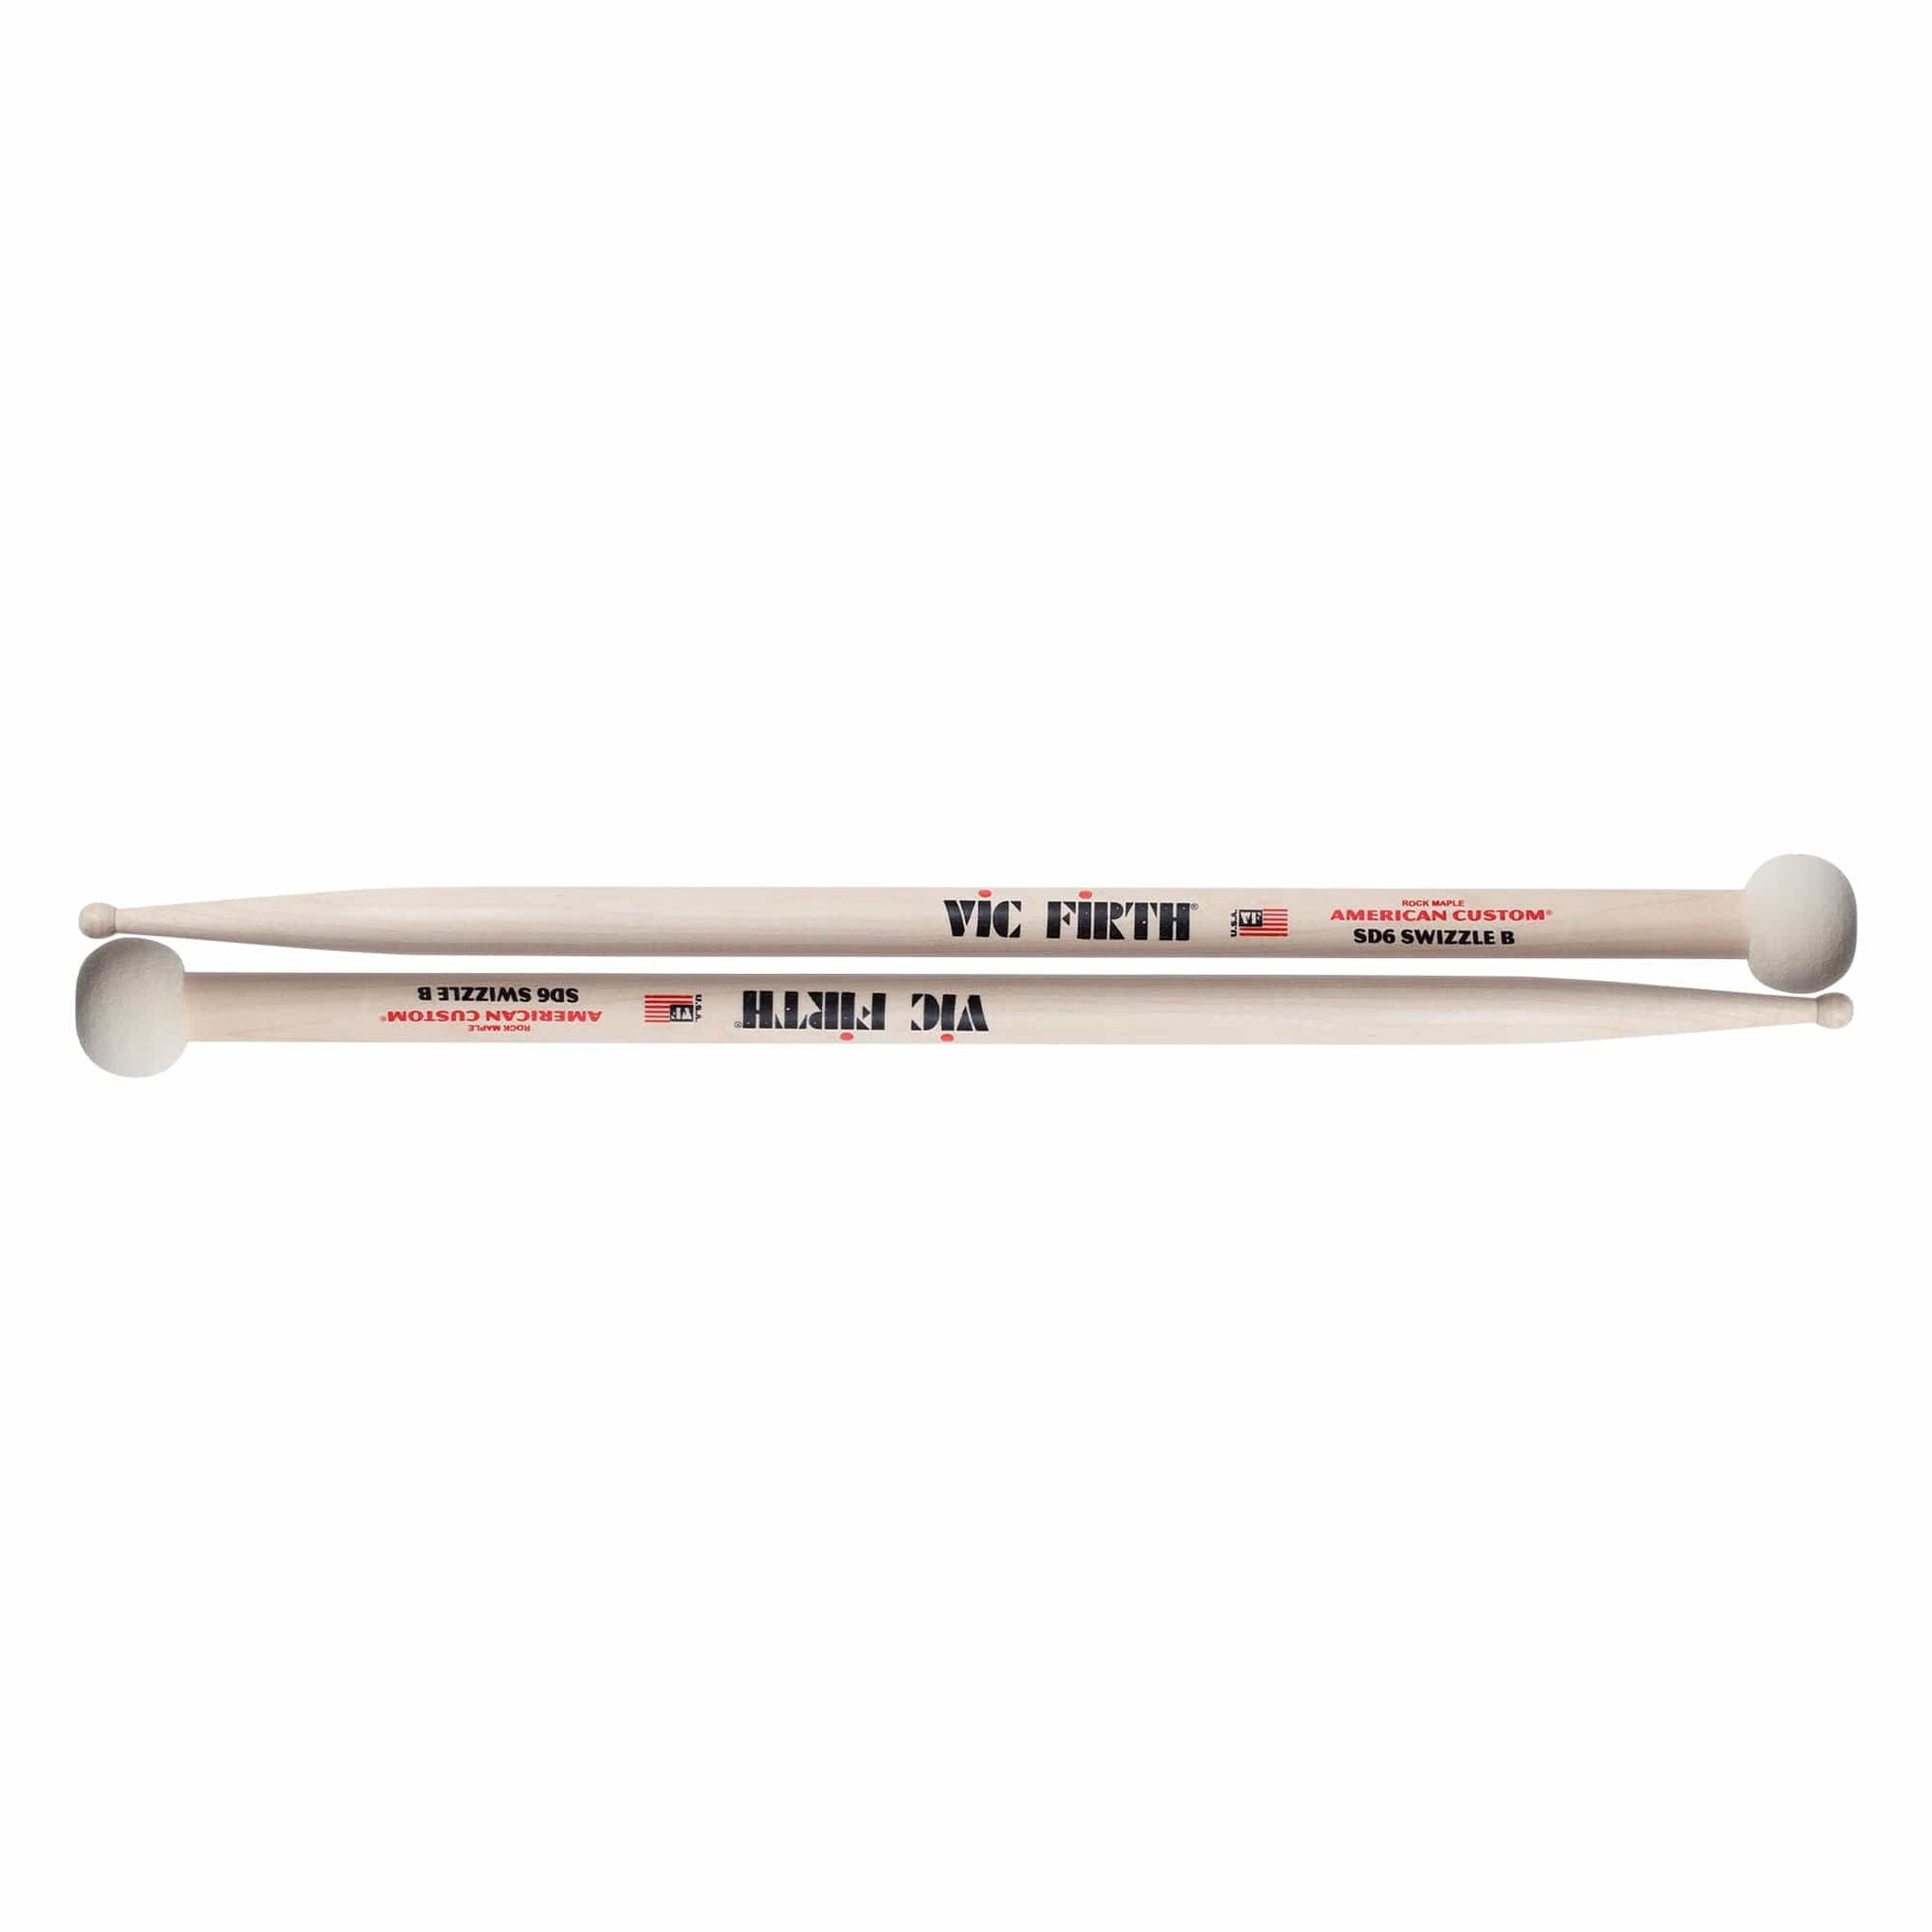 Vic Firth American Custom SD6 Swizzle B Drum Sticks Drums and Percussion / Parts and Accessories / Drum Sticks and Mallets